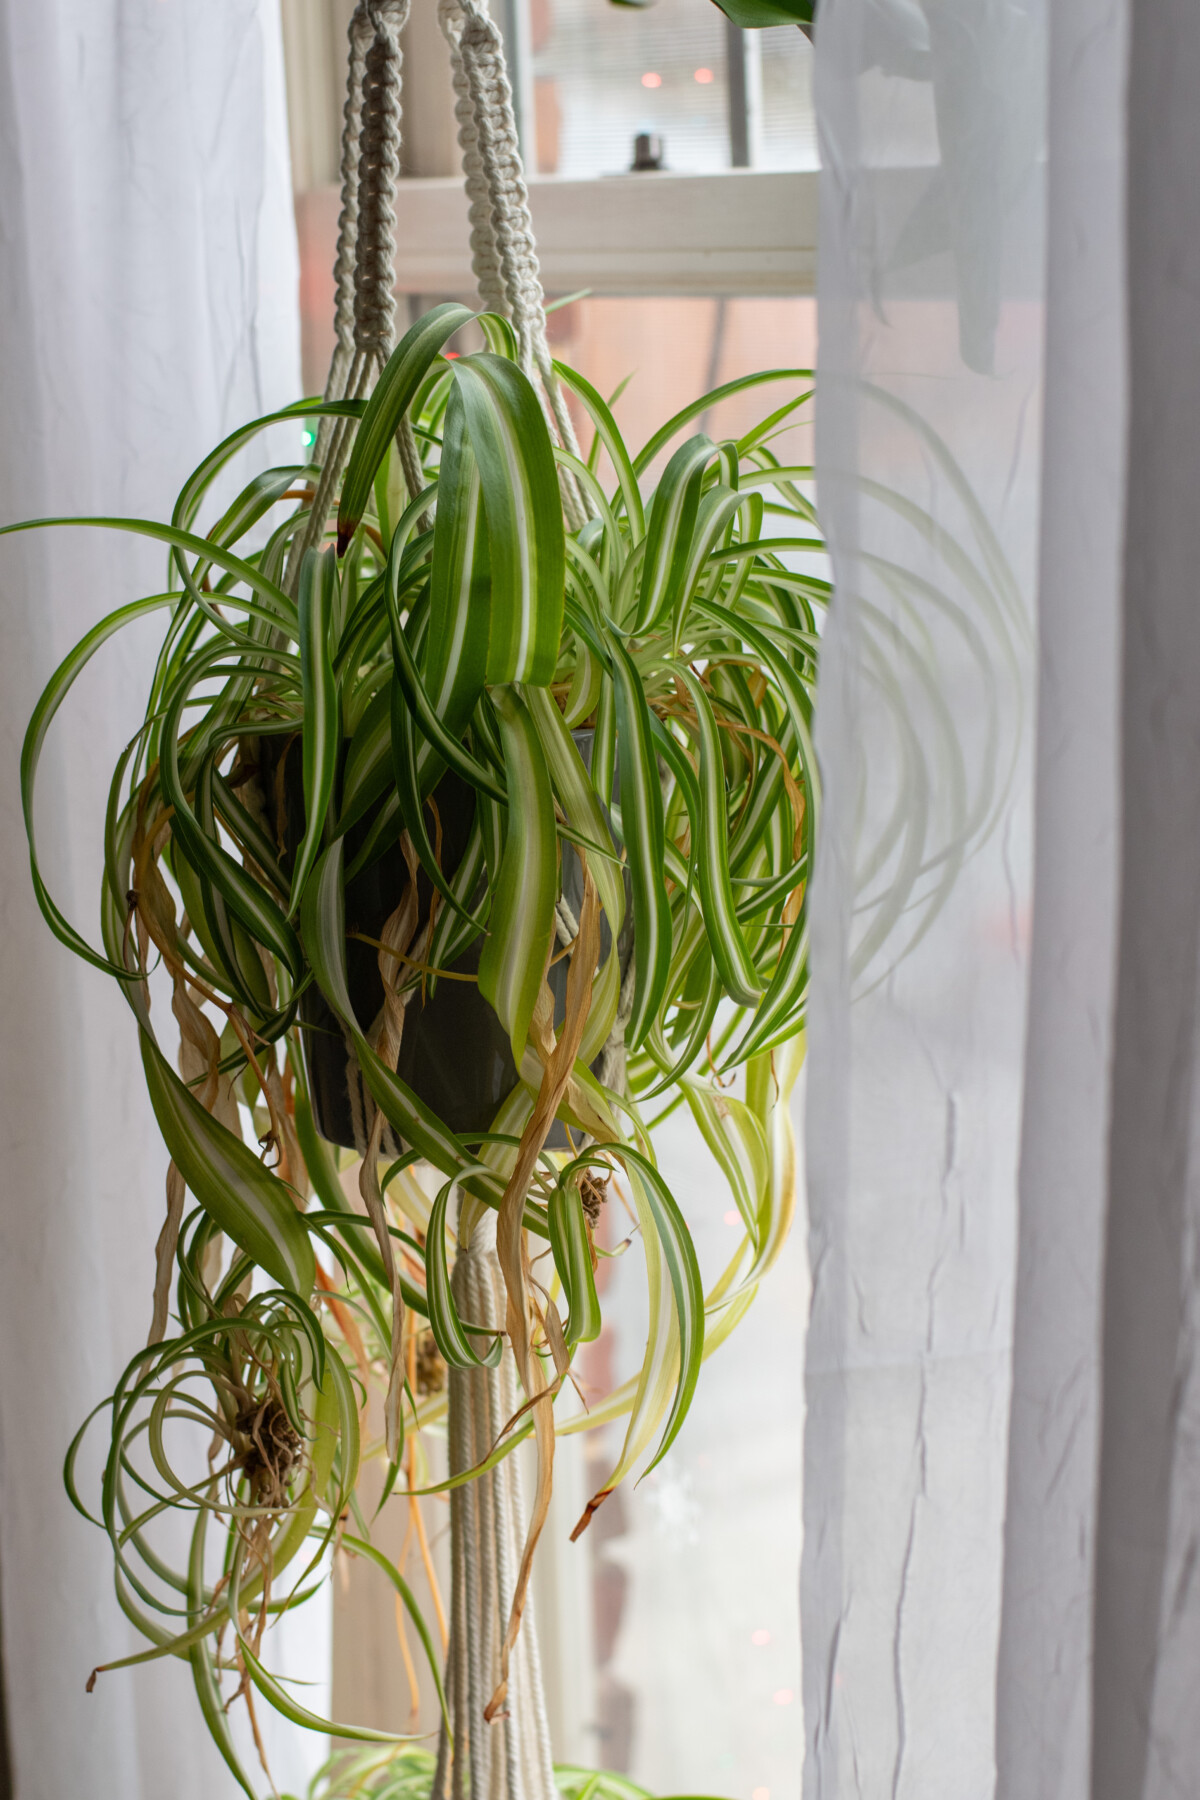 Shaggy spider plant hanging in a window